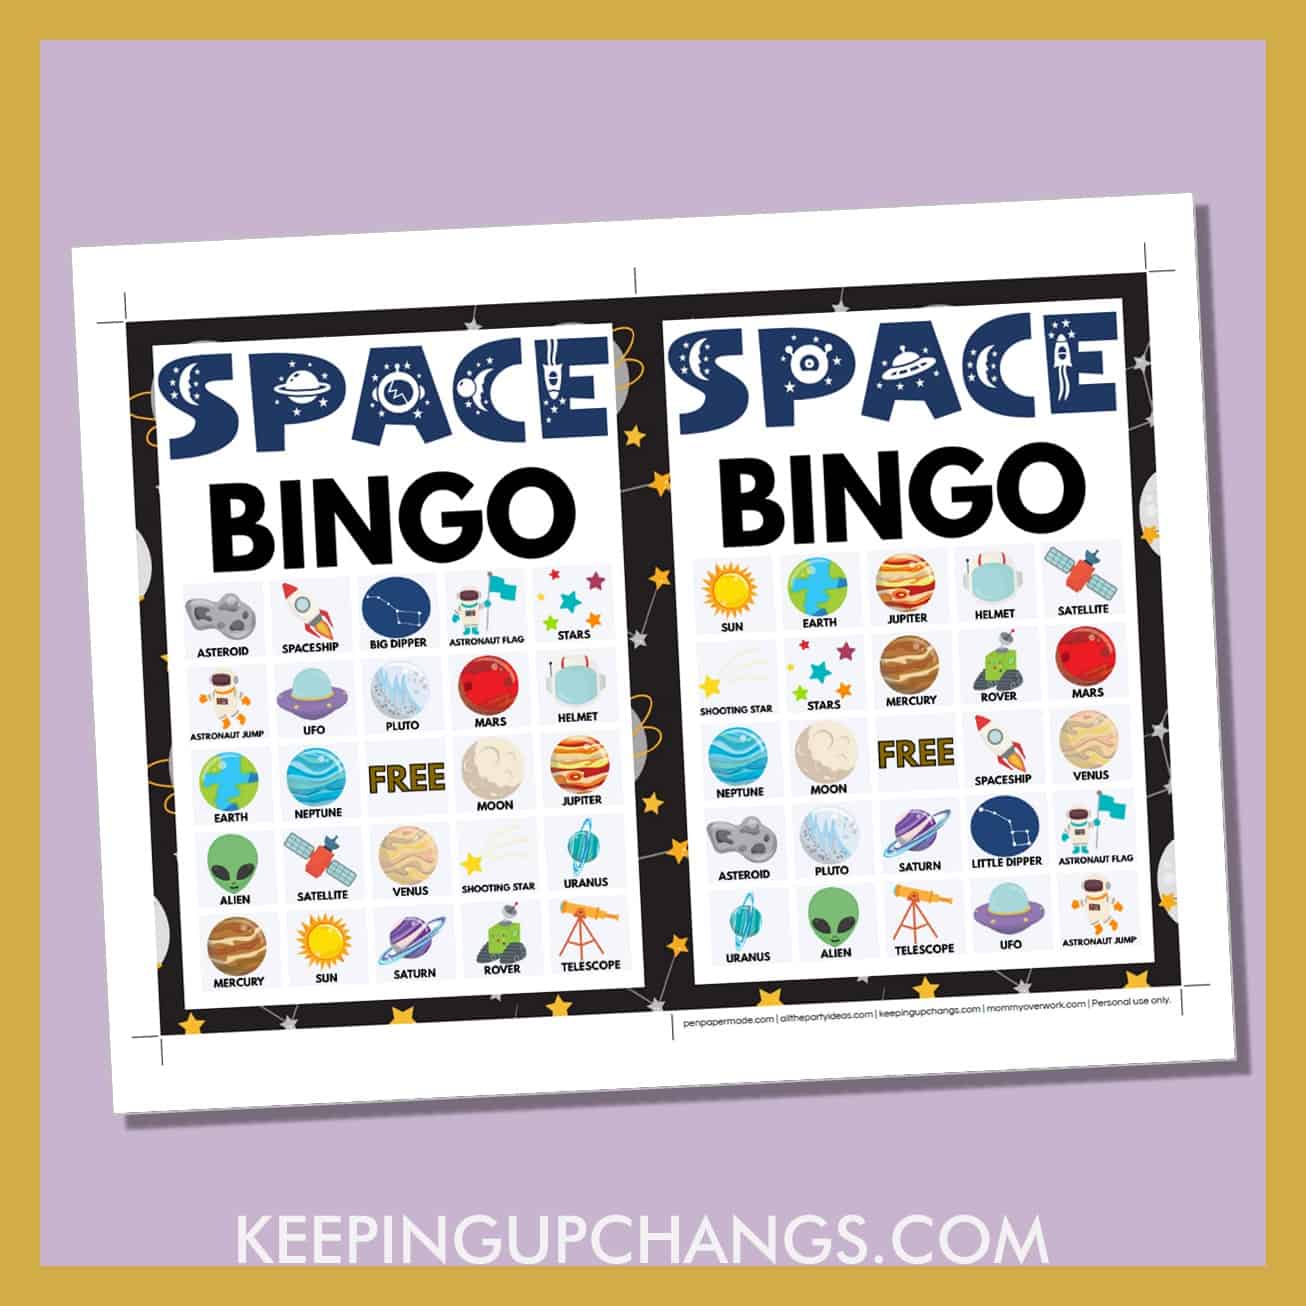 free space bingo card 5x5 5x7 game boards with images and text words.